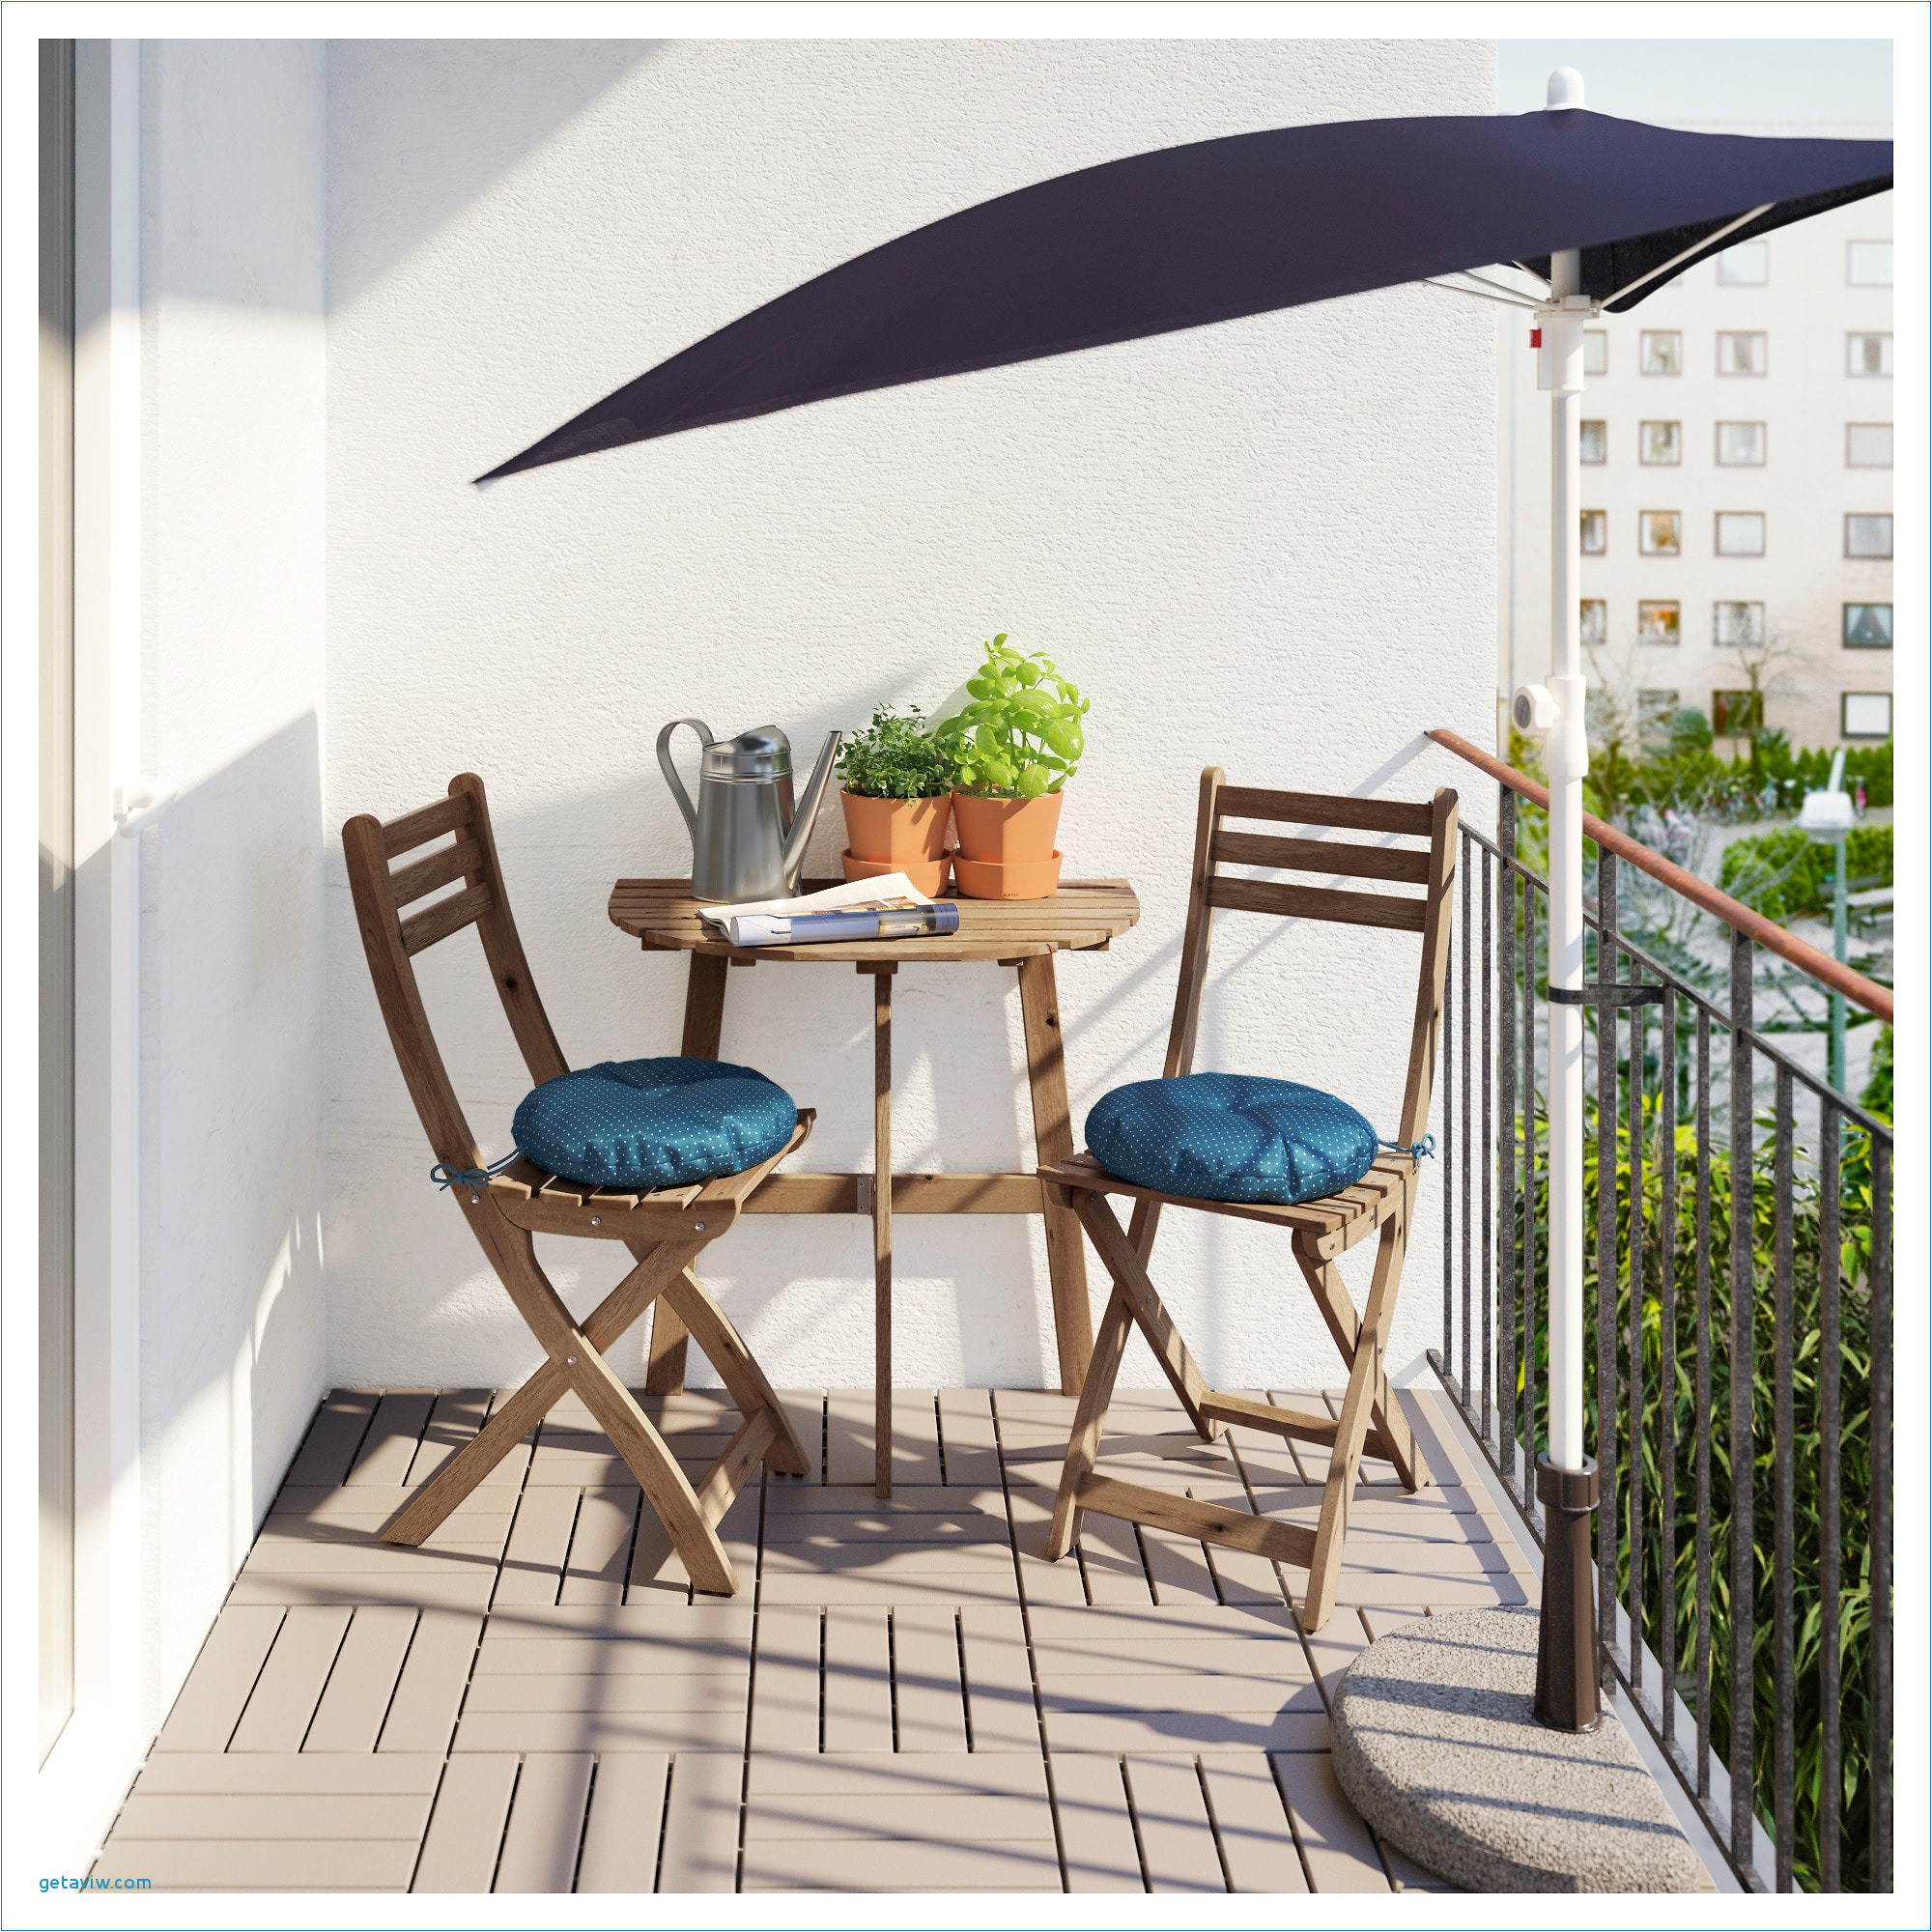 ikea askholmen table f wall 2 fold chairs outdoor